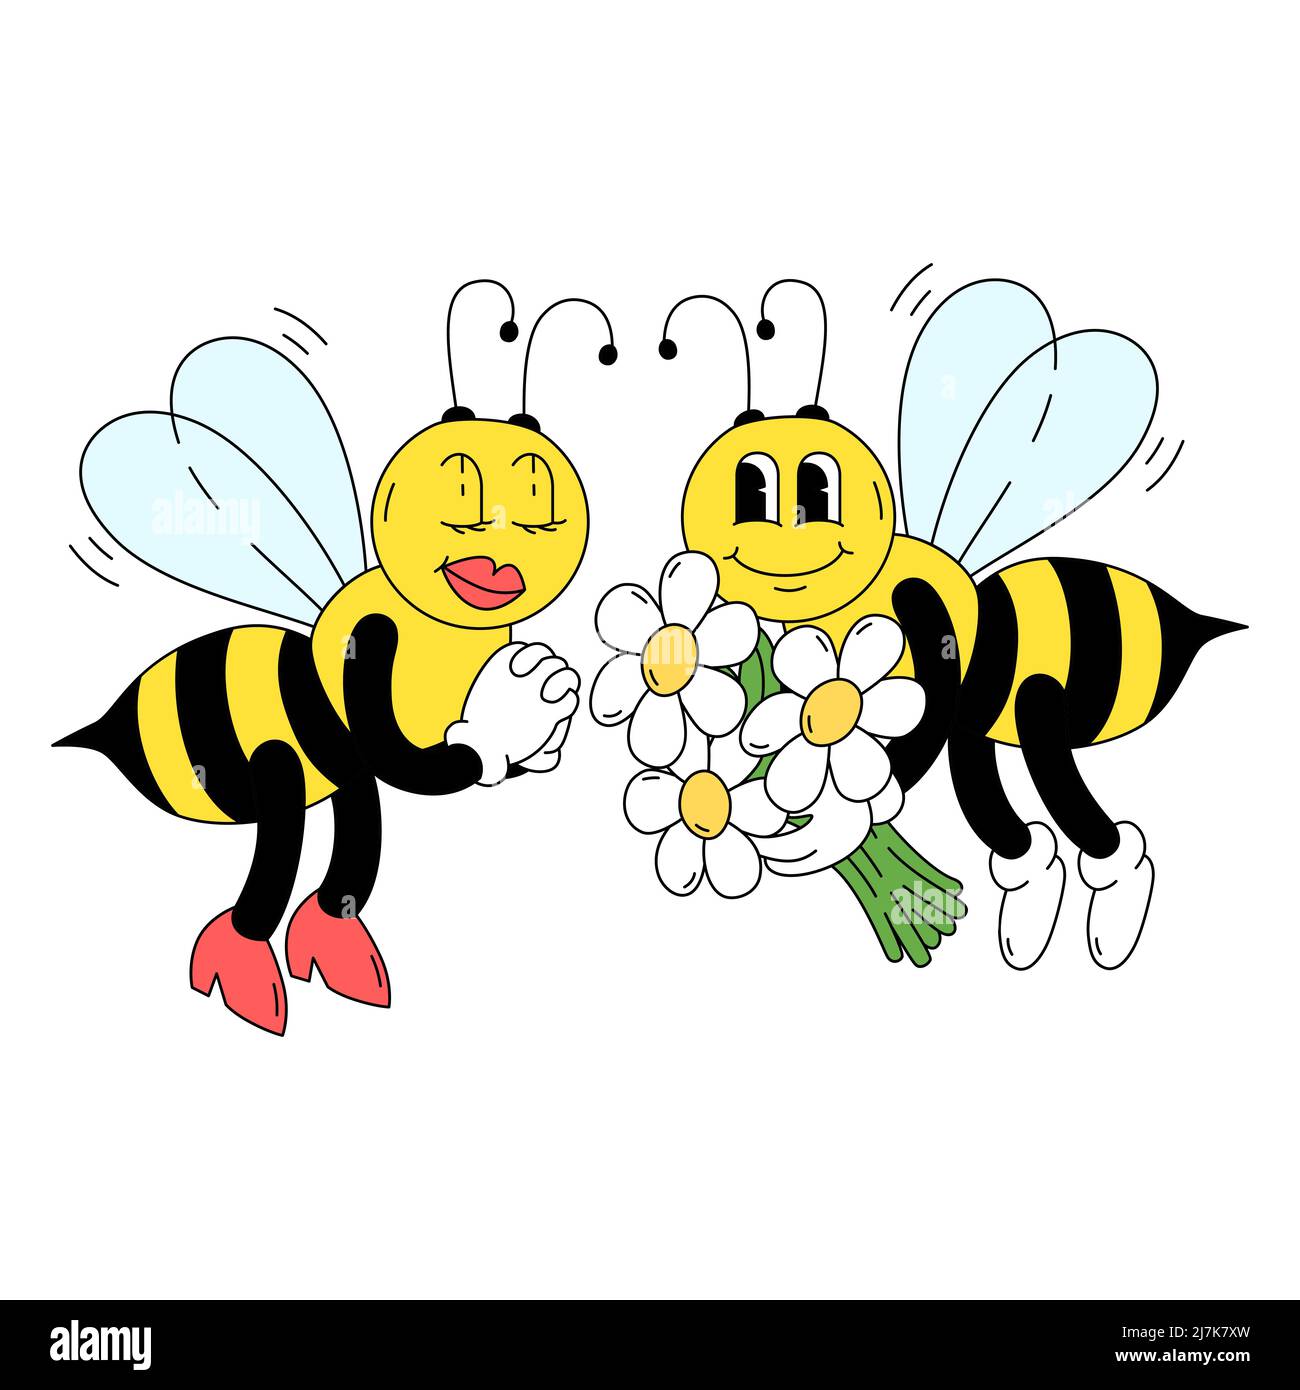 Vector illustration of bees in traditional cartoon style. Bugs on a romantic date. Childish drawing for print, poster, sticker, greeting card Stock Vector